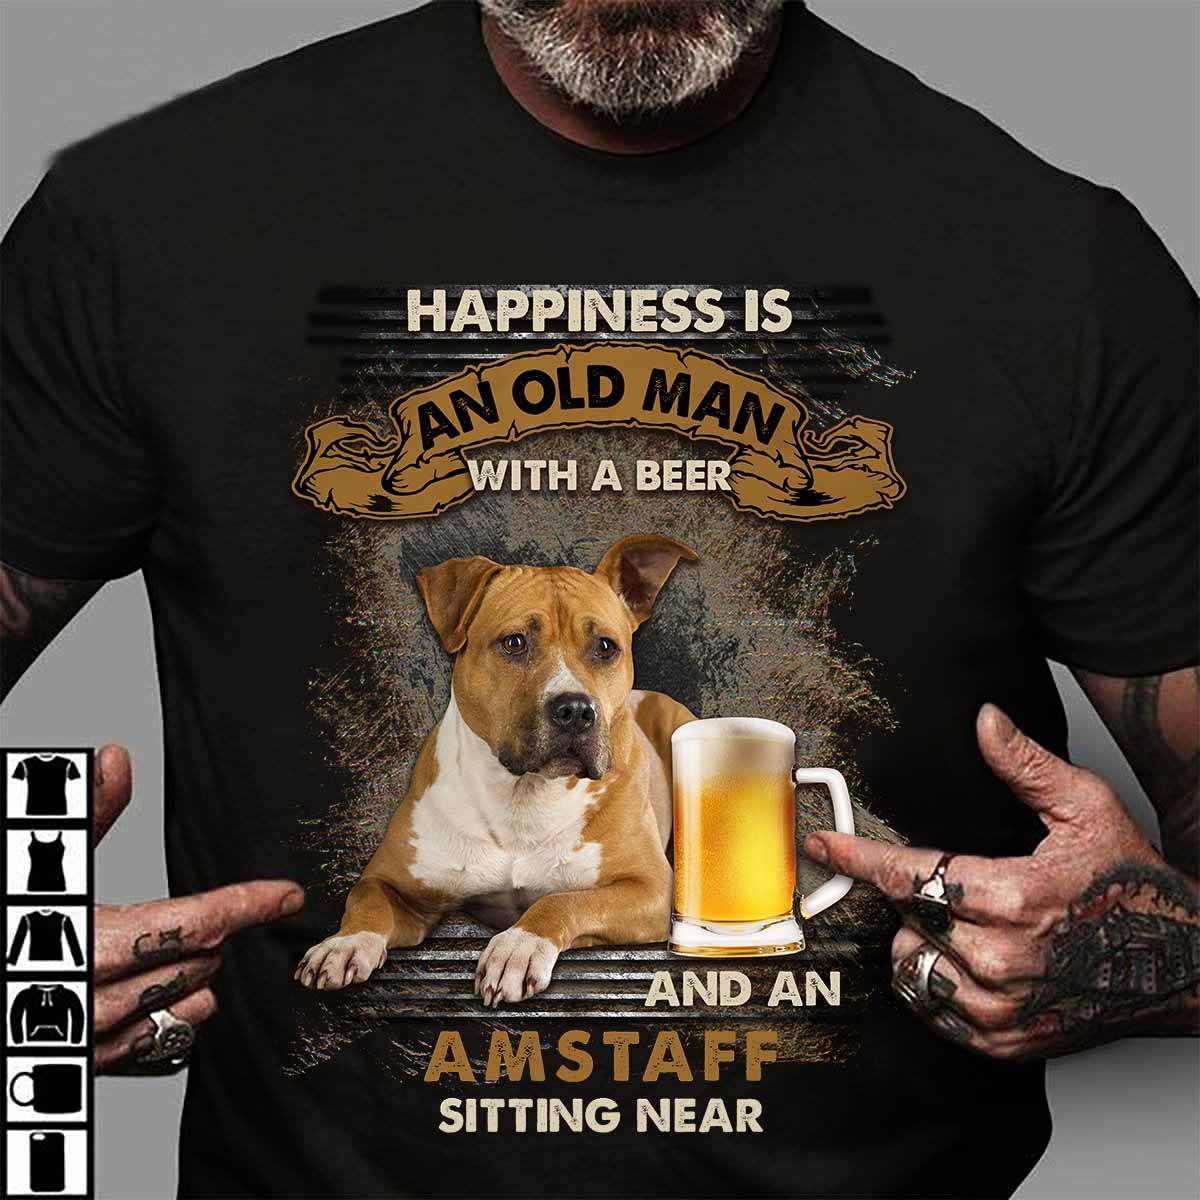 Happiness is an old man with a beer and a Amstaff sitting near - Amstaff dog